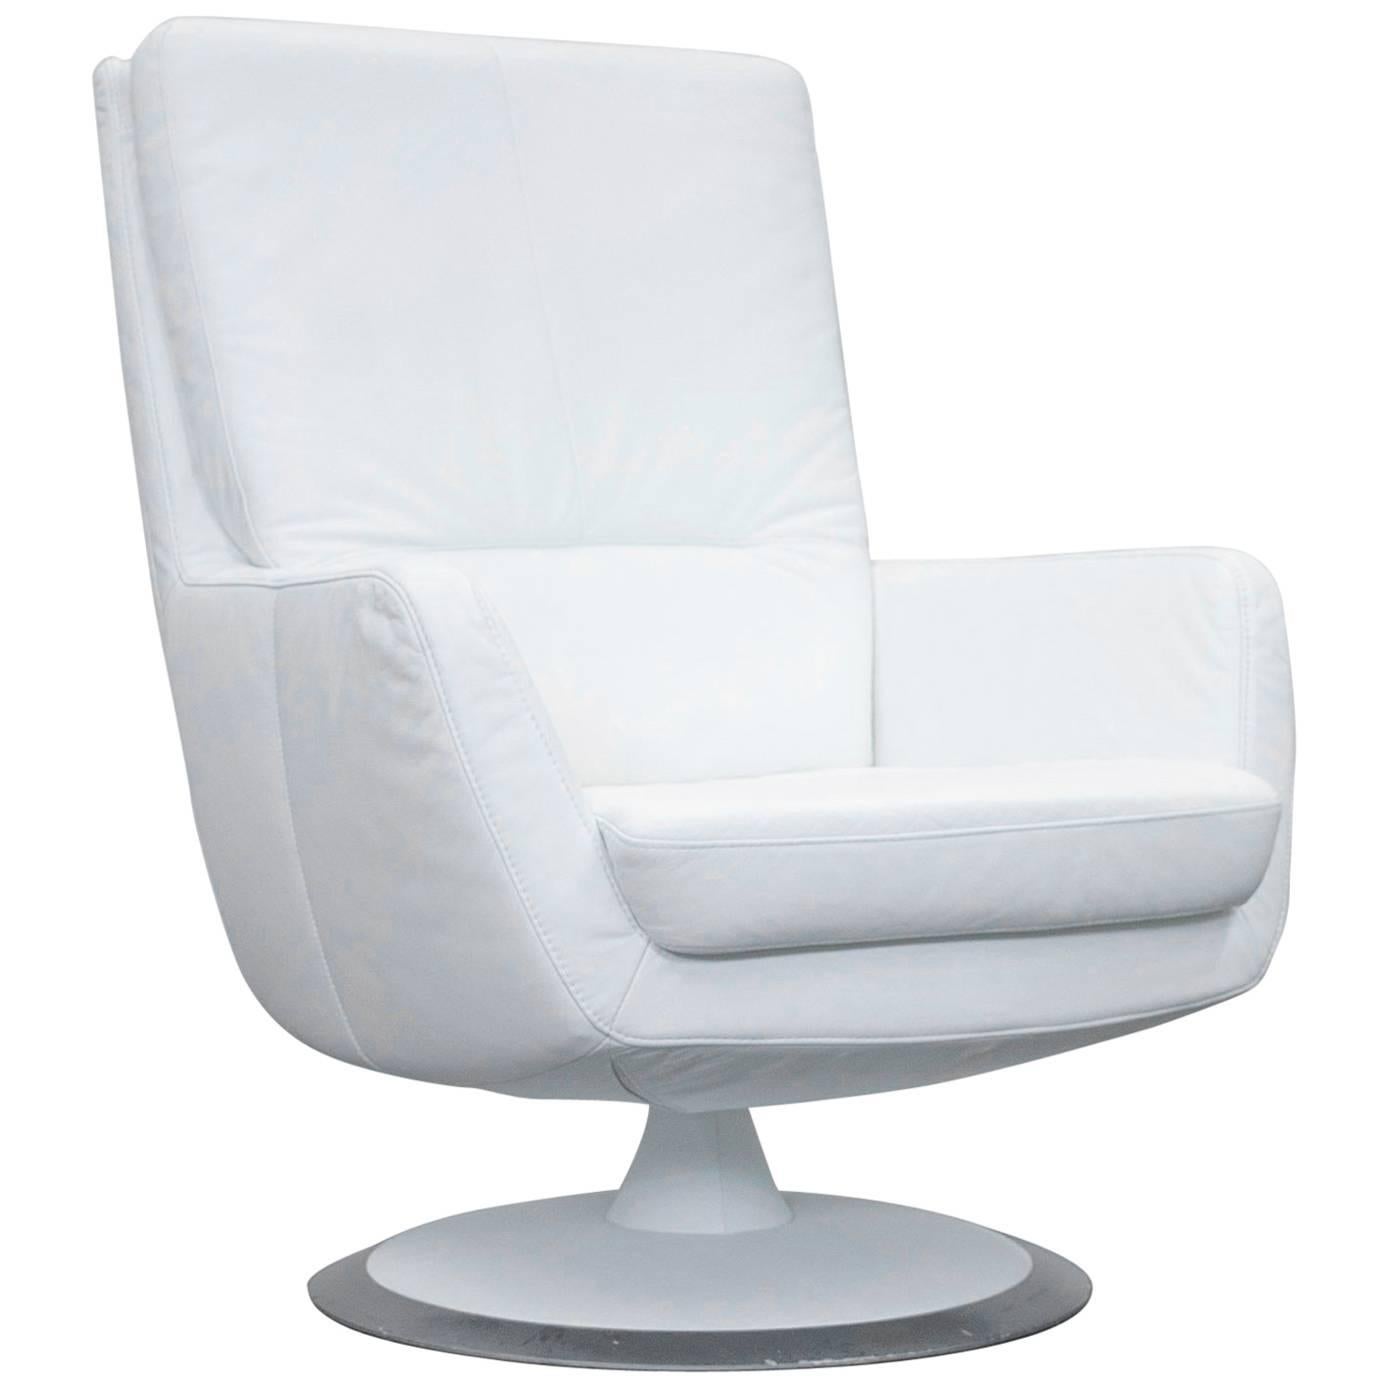 Musterring Designer Armchair Leather White One Seat Couch Modern For Sale